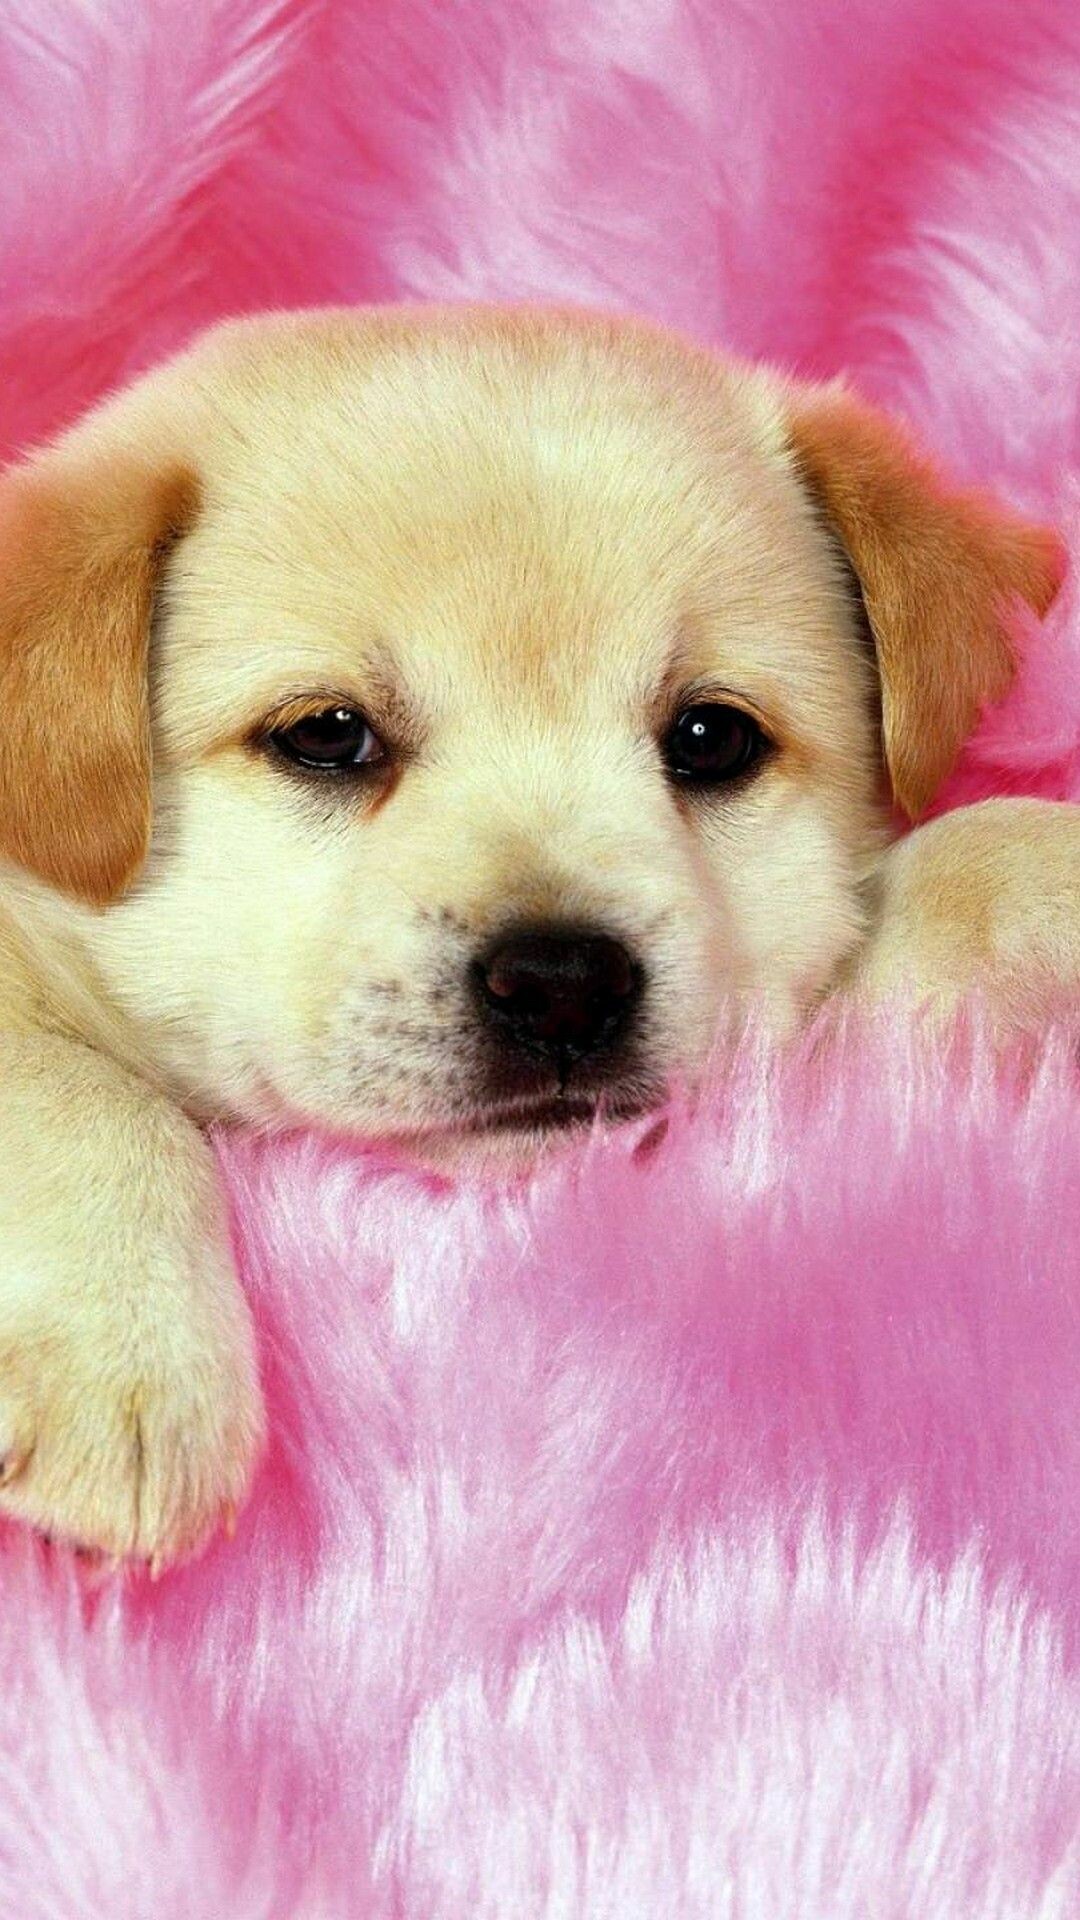 Puppy: Most popular domestic animals in the world, Pup. 1080x1920 Full HD Wallpaper.